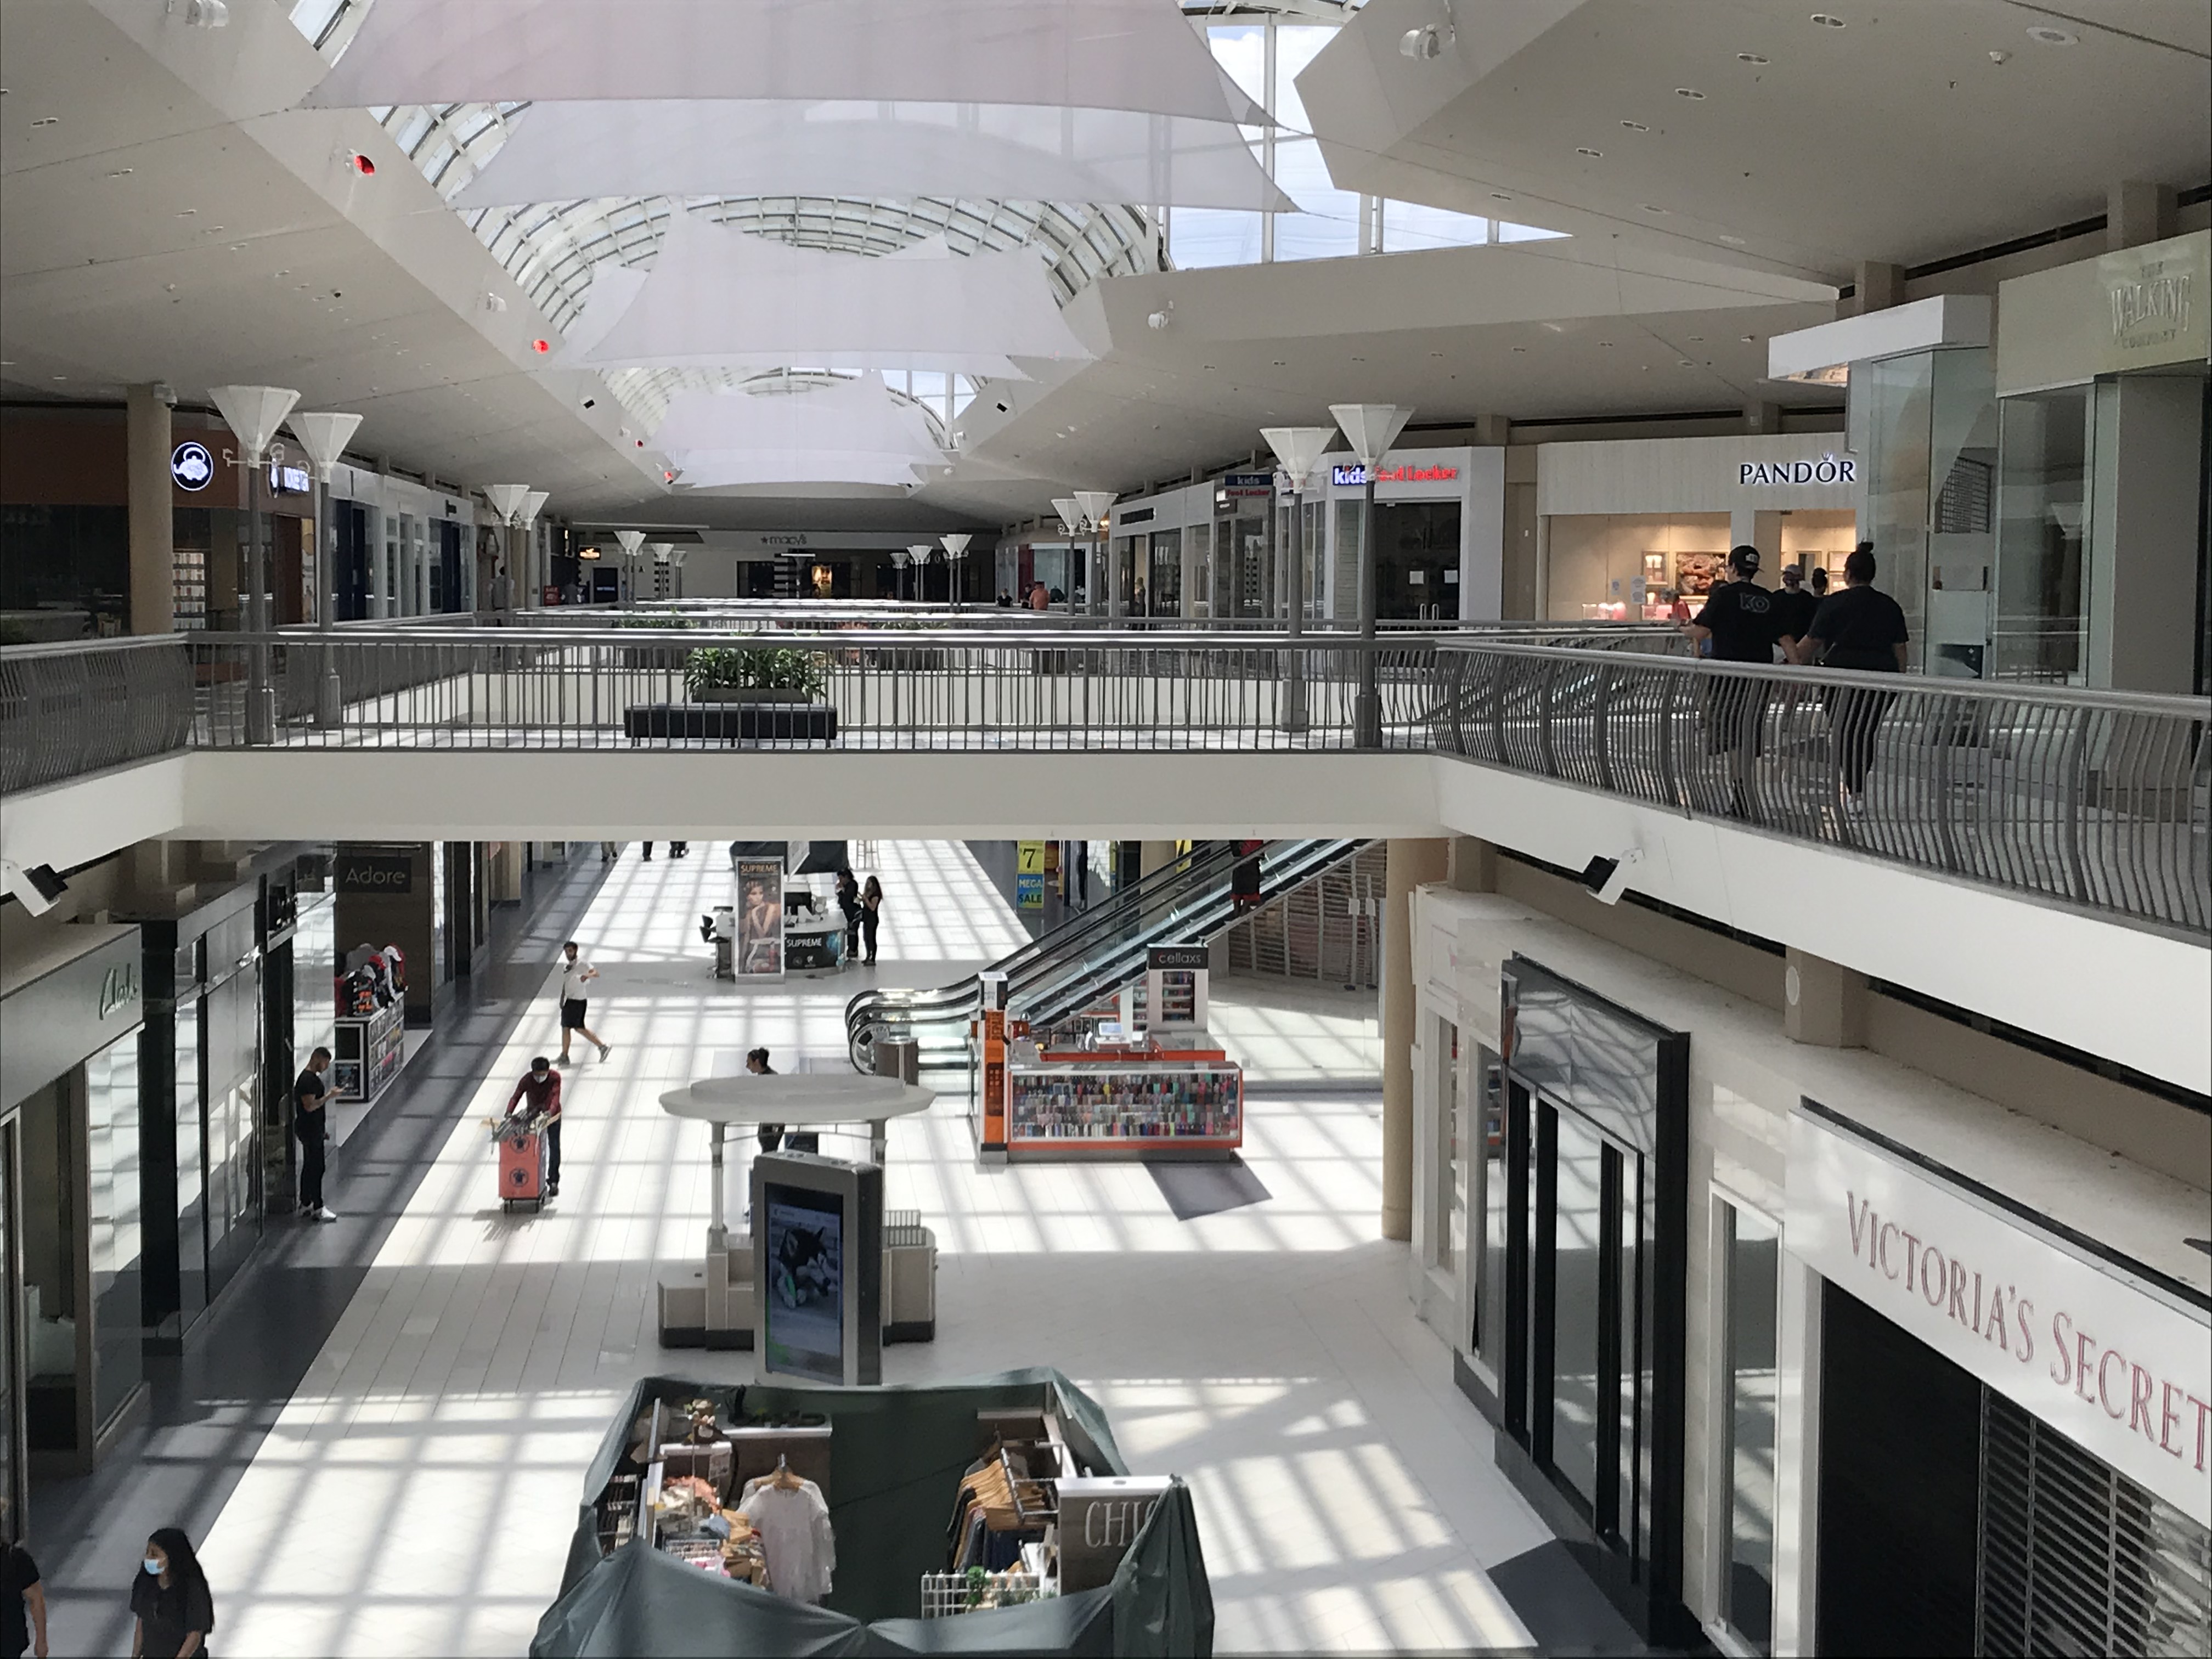 Riverchase Galleria, Alabama's largest shopping mall, opens after nearly  two months 